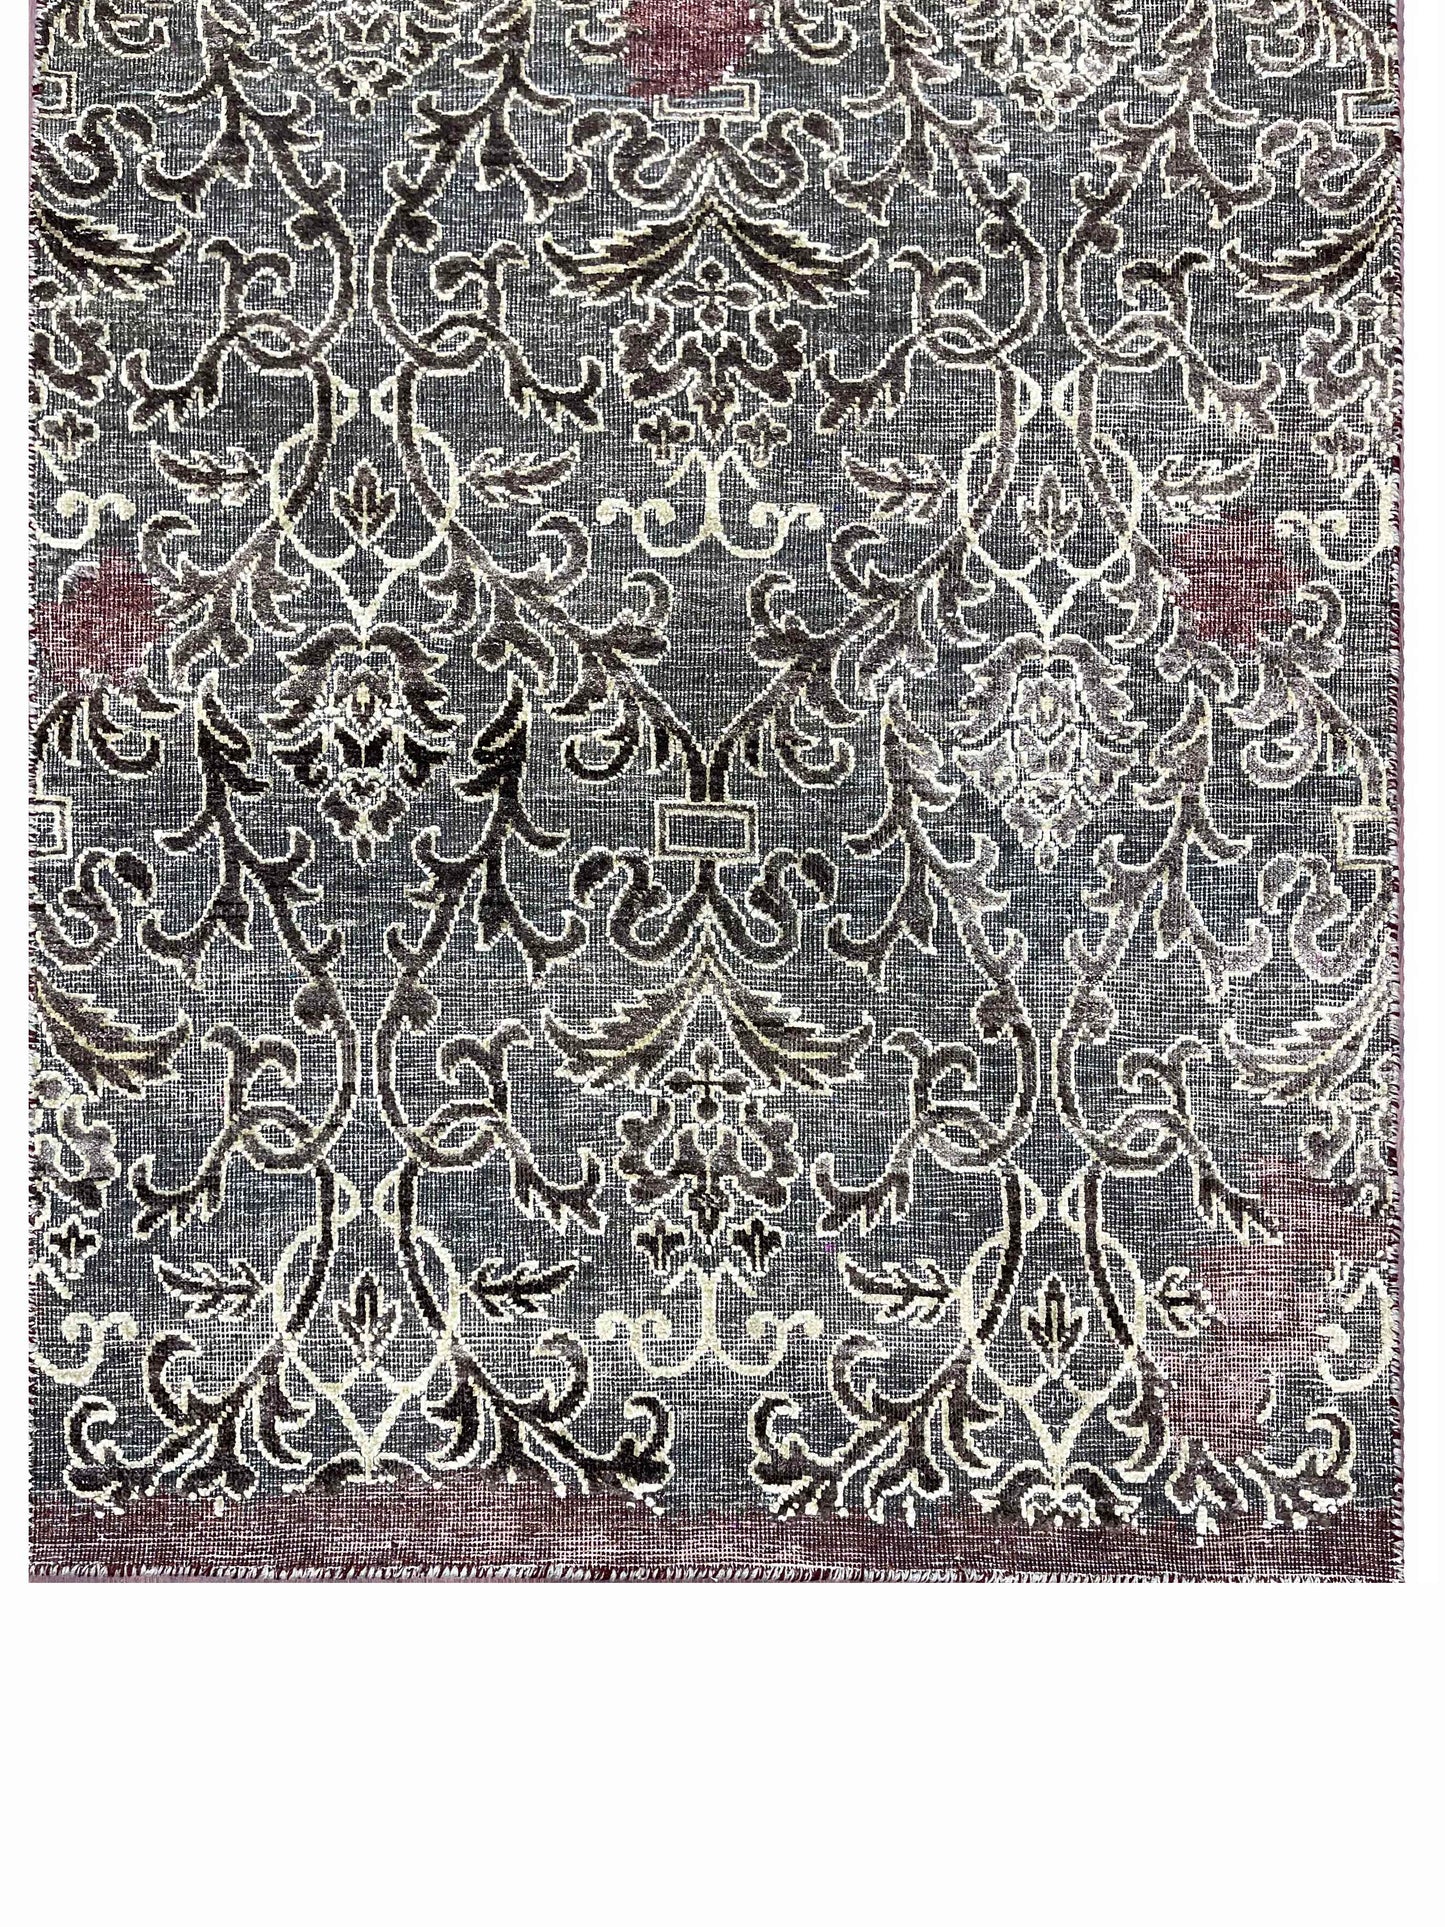 Get trendy with Samarkand Handknotted Runner Rug Brown 3.0X9.7ft 92x293cms - Runner Rugs available at Jaipur Oriental Rugs. Grab yours for $1555.00 today!